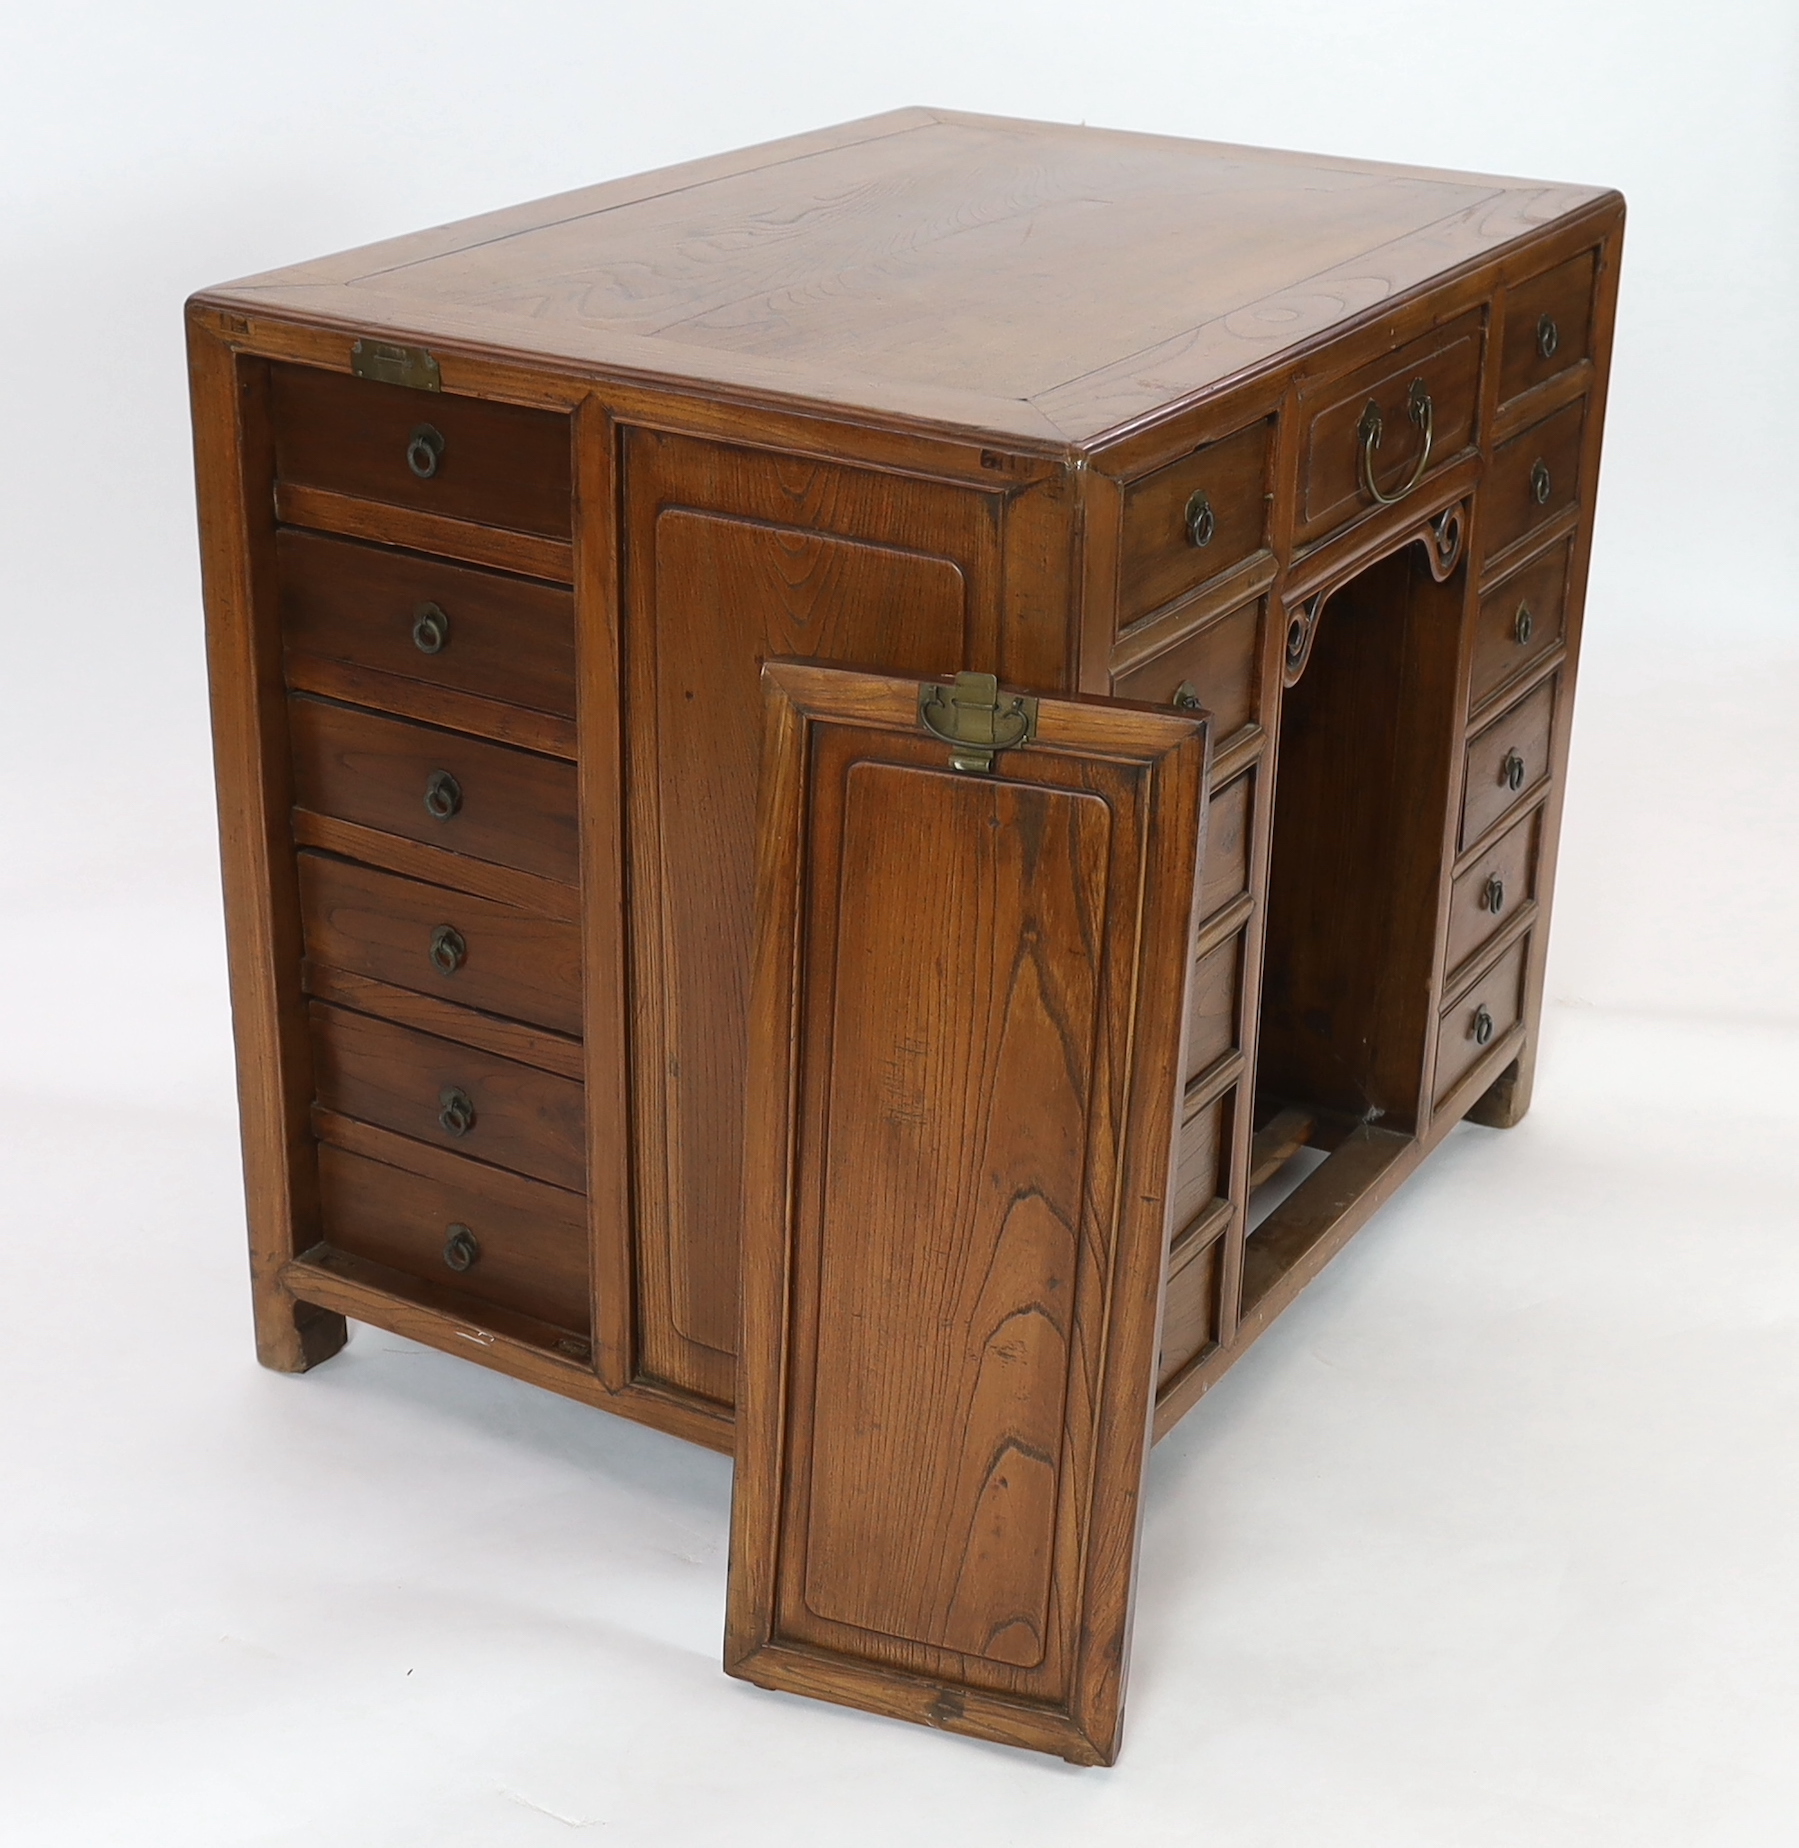 A Chinese jumu kneehole desk, late Qing dynasty